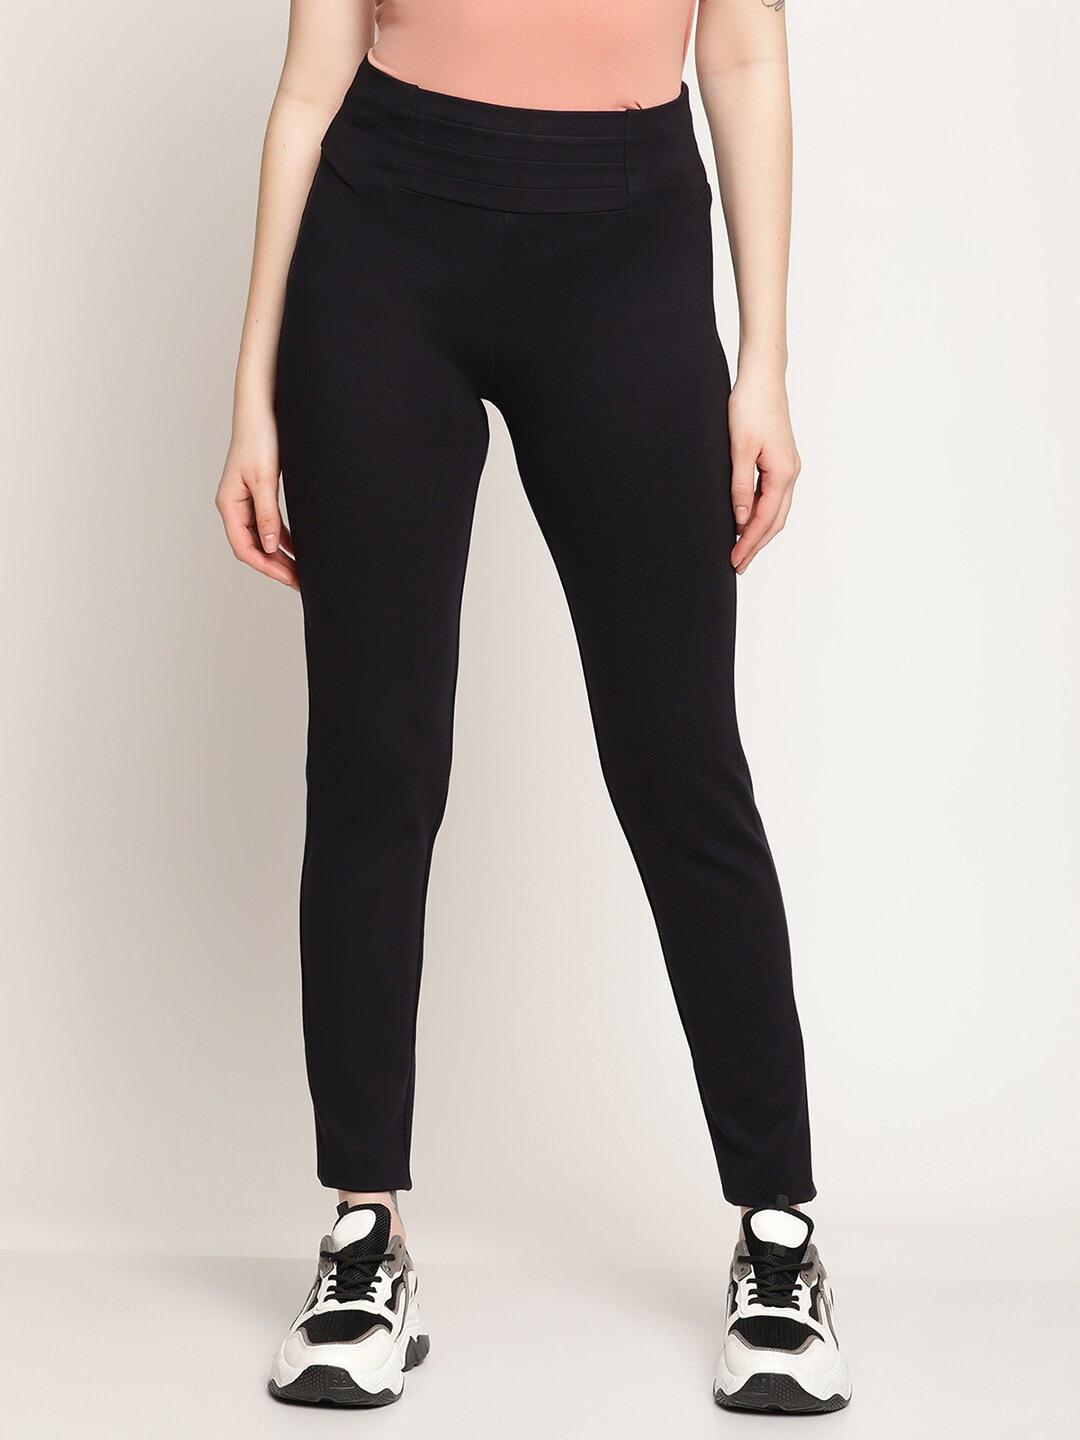 cantabil-women-navy-blue-solid-cotton-jeggings